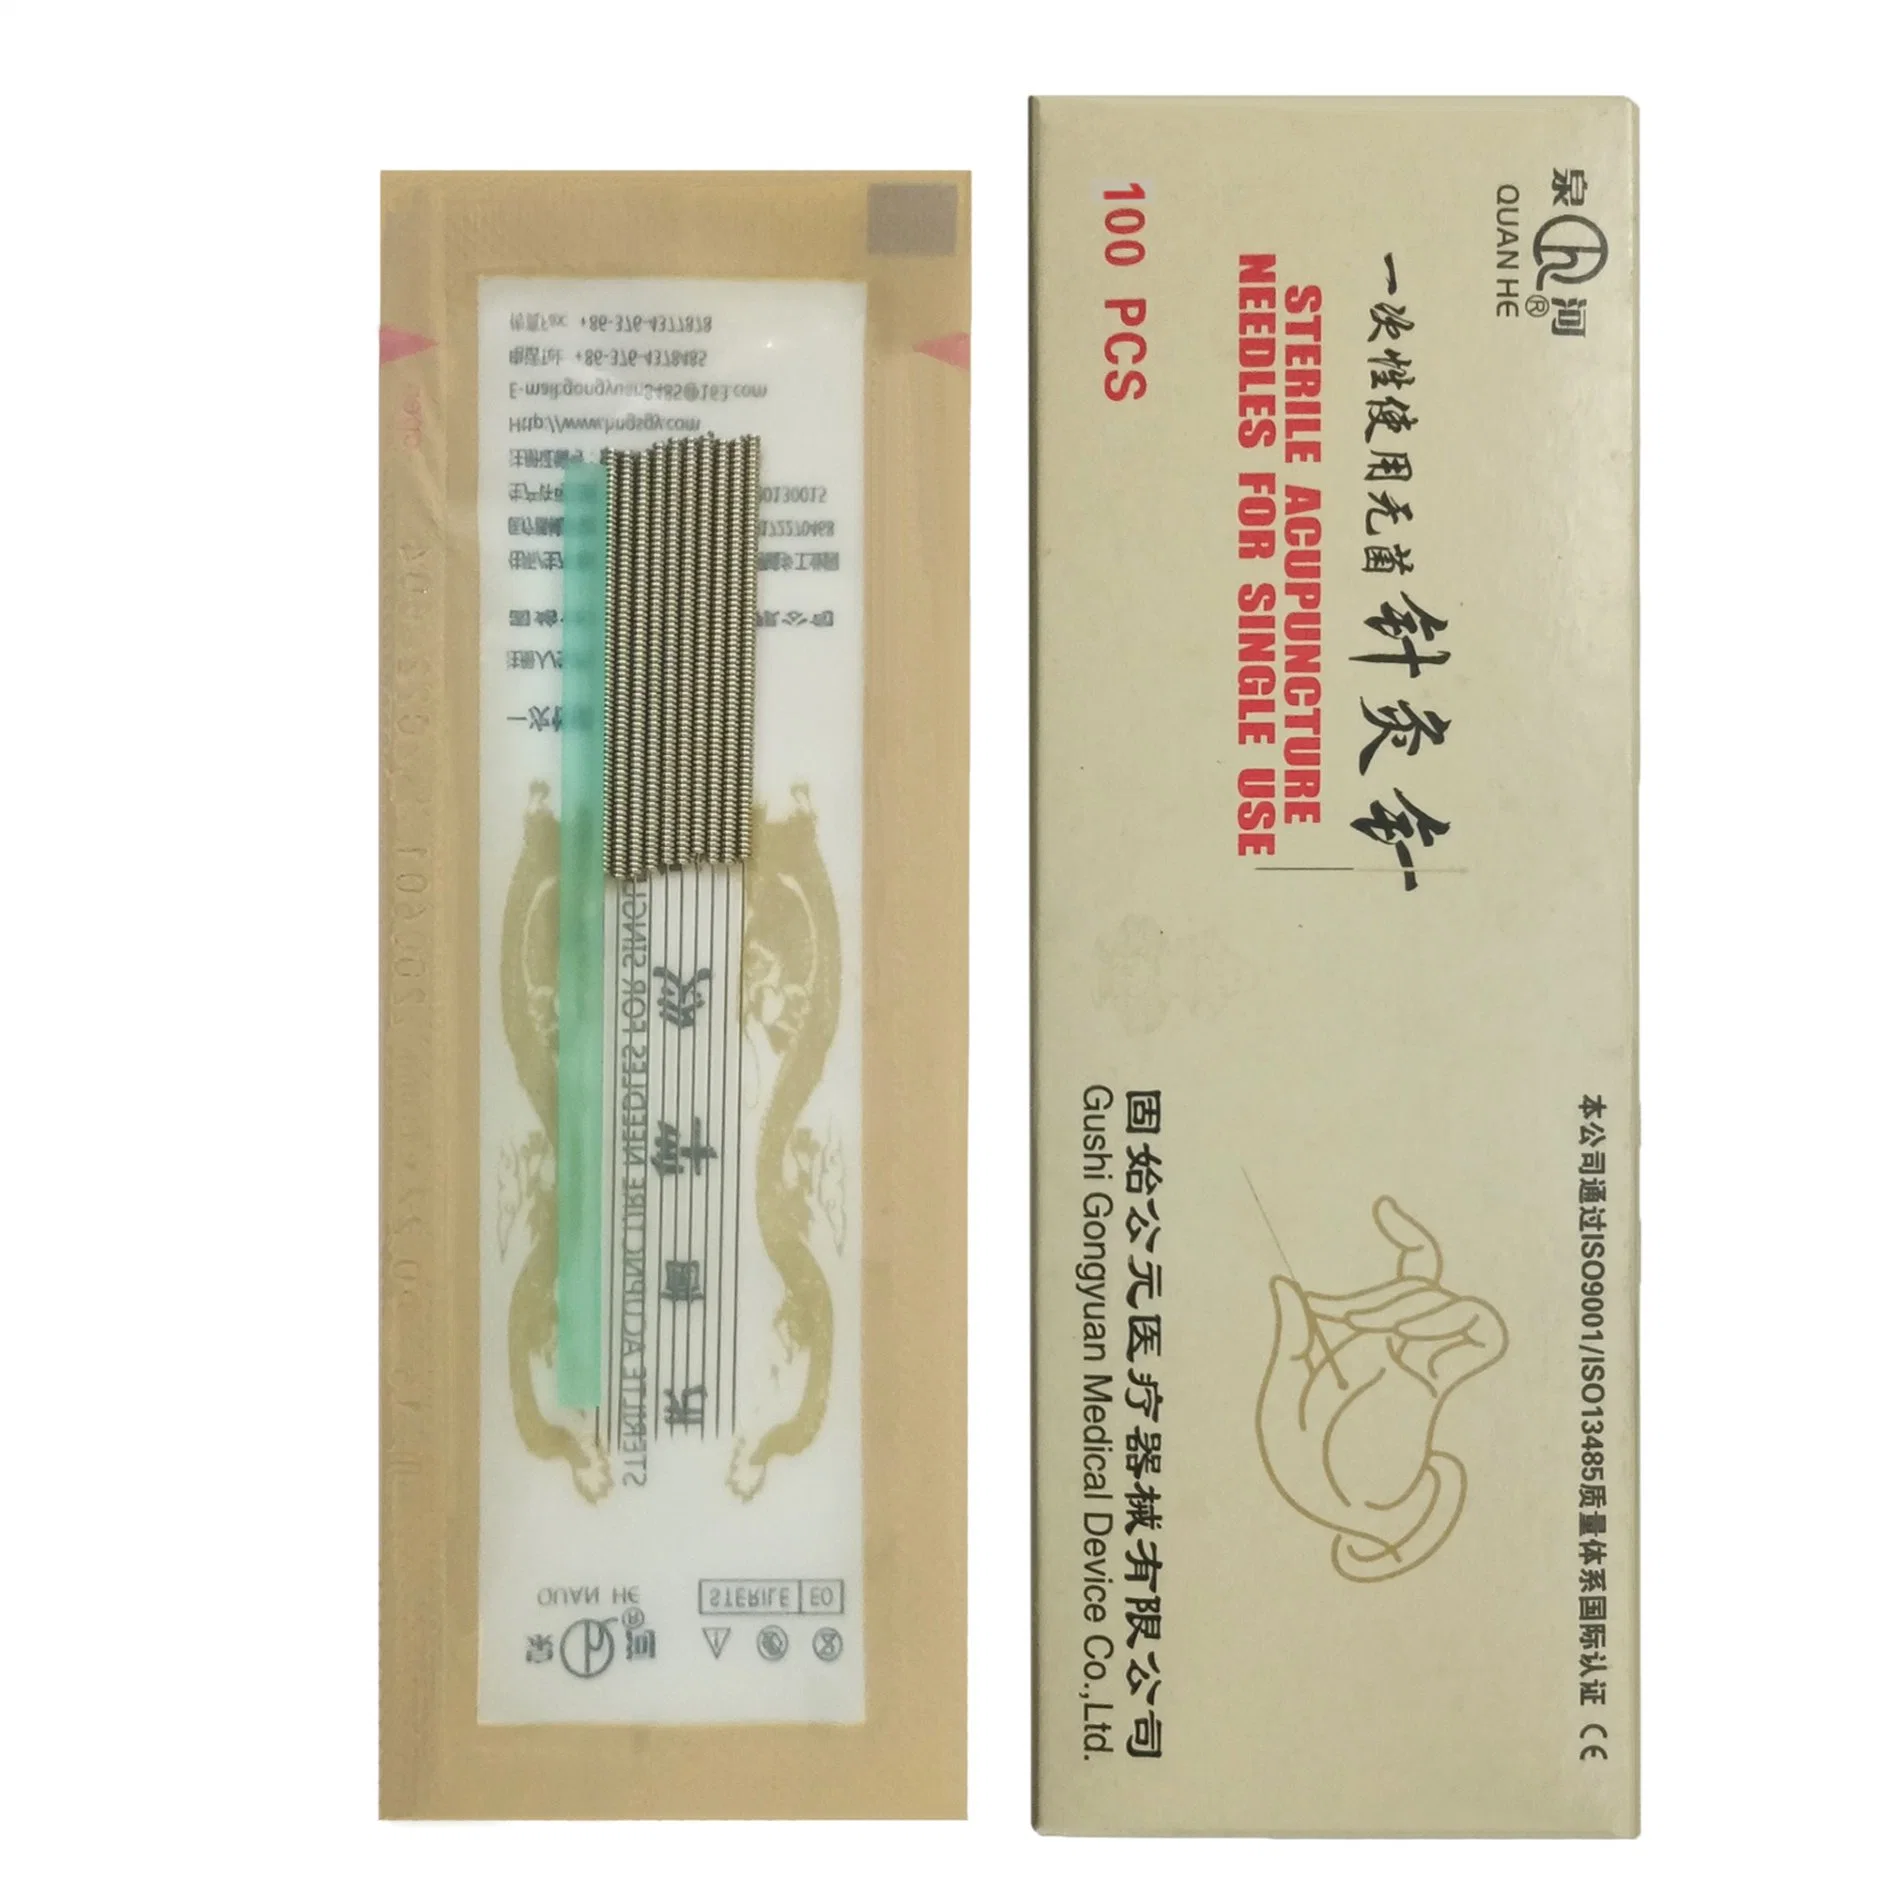 Professtional Supplier 100PCS Disposable Sterile Full Plastic Bag Pack Acupuncture Needles with Tube